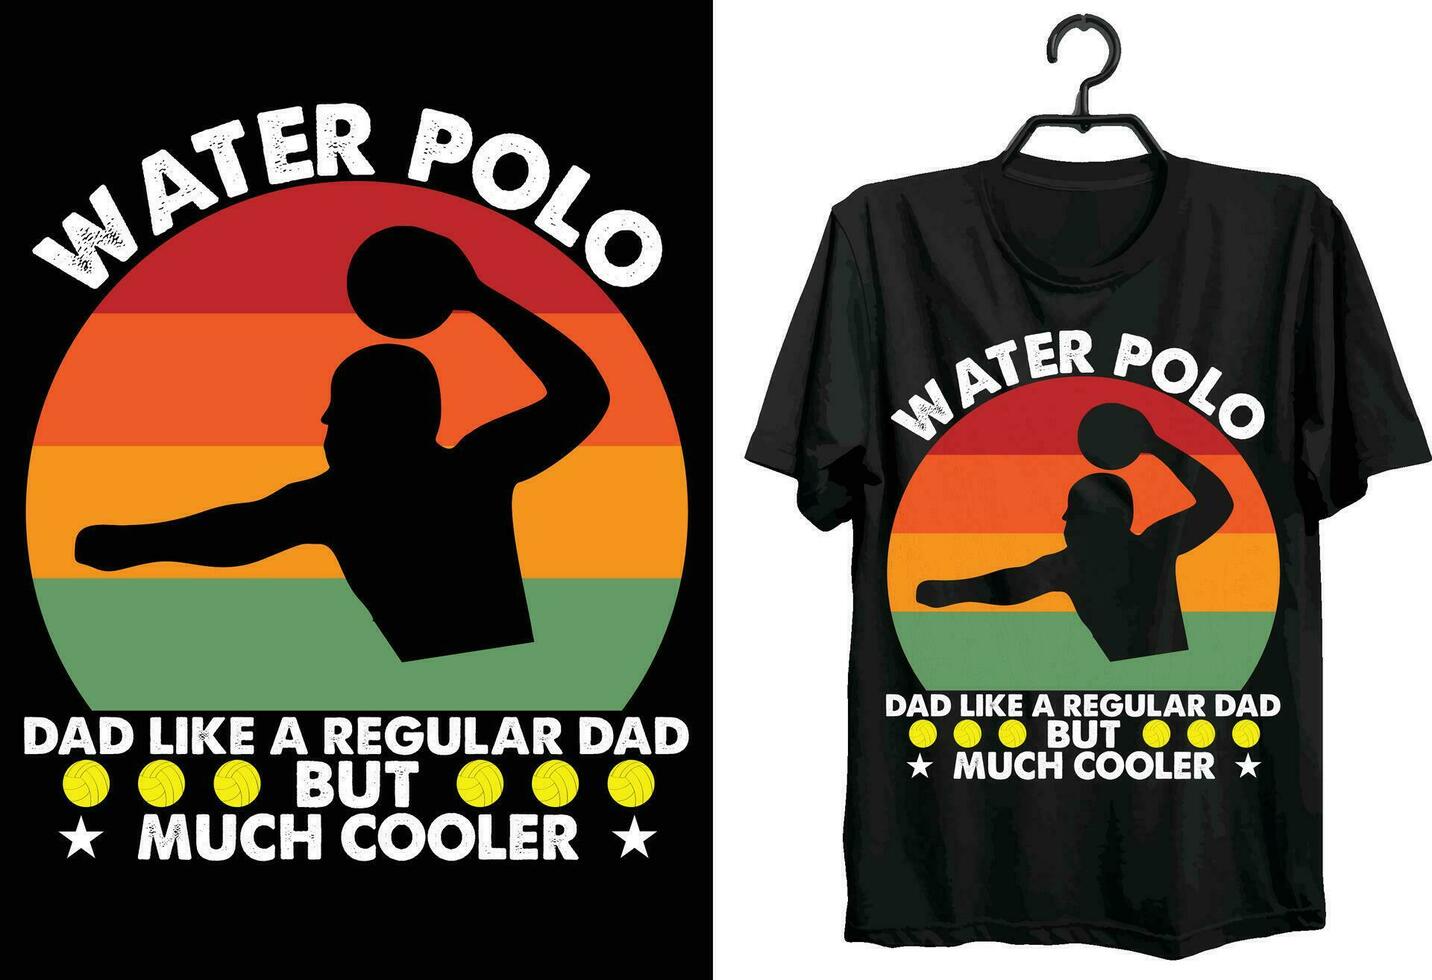 Water Polo Dad Like A Regular Dad But Much Cooler. Water Polo T-shirt Design. Funny Gift Item Water Polo T-shirt Design For Water Polo Players. vector